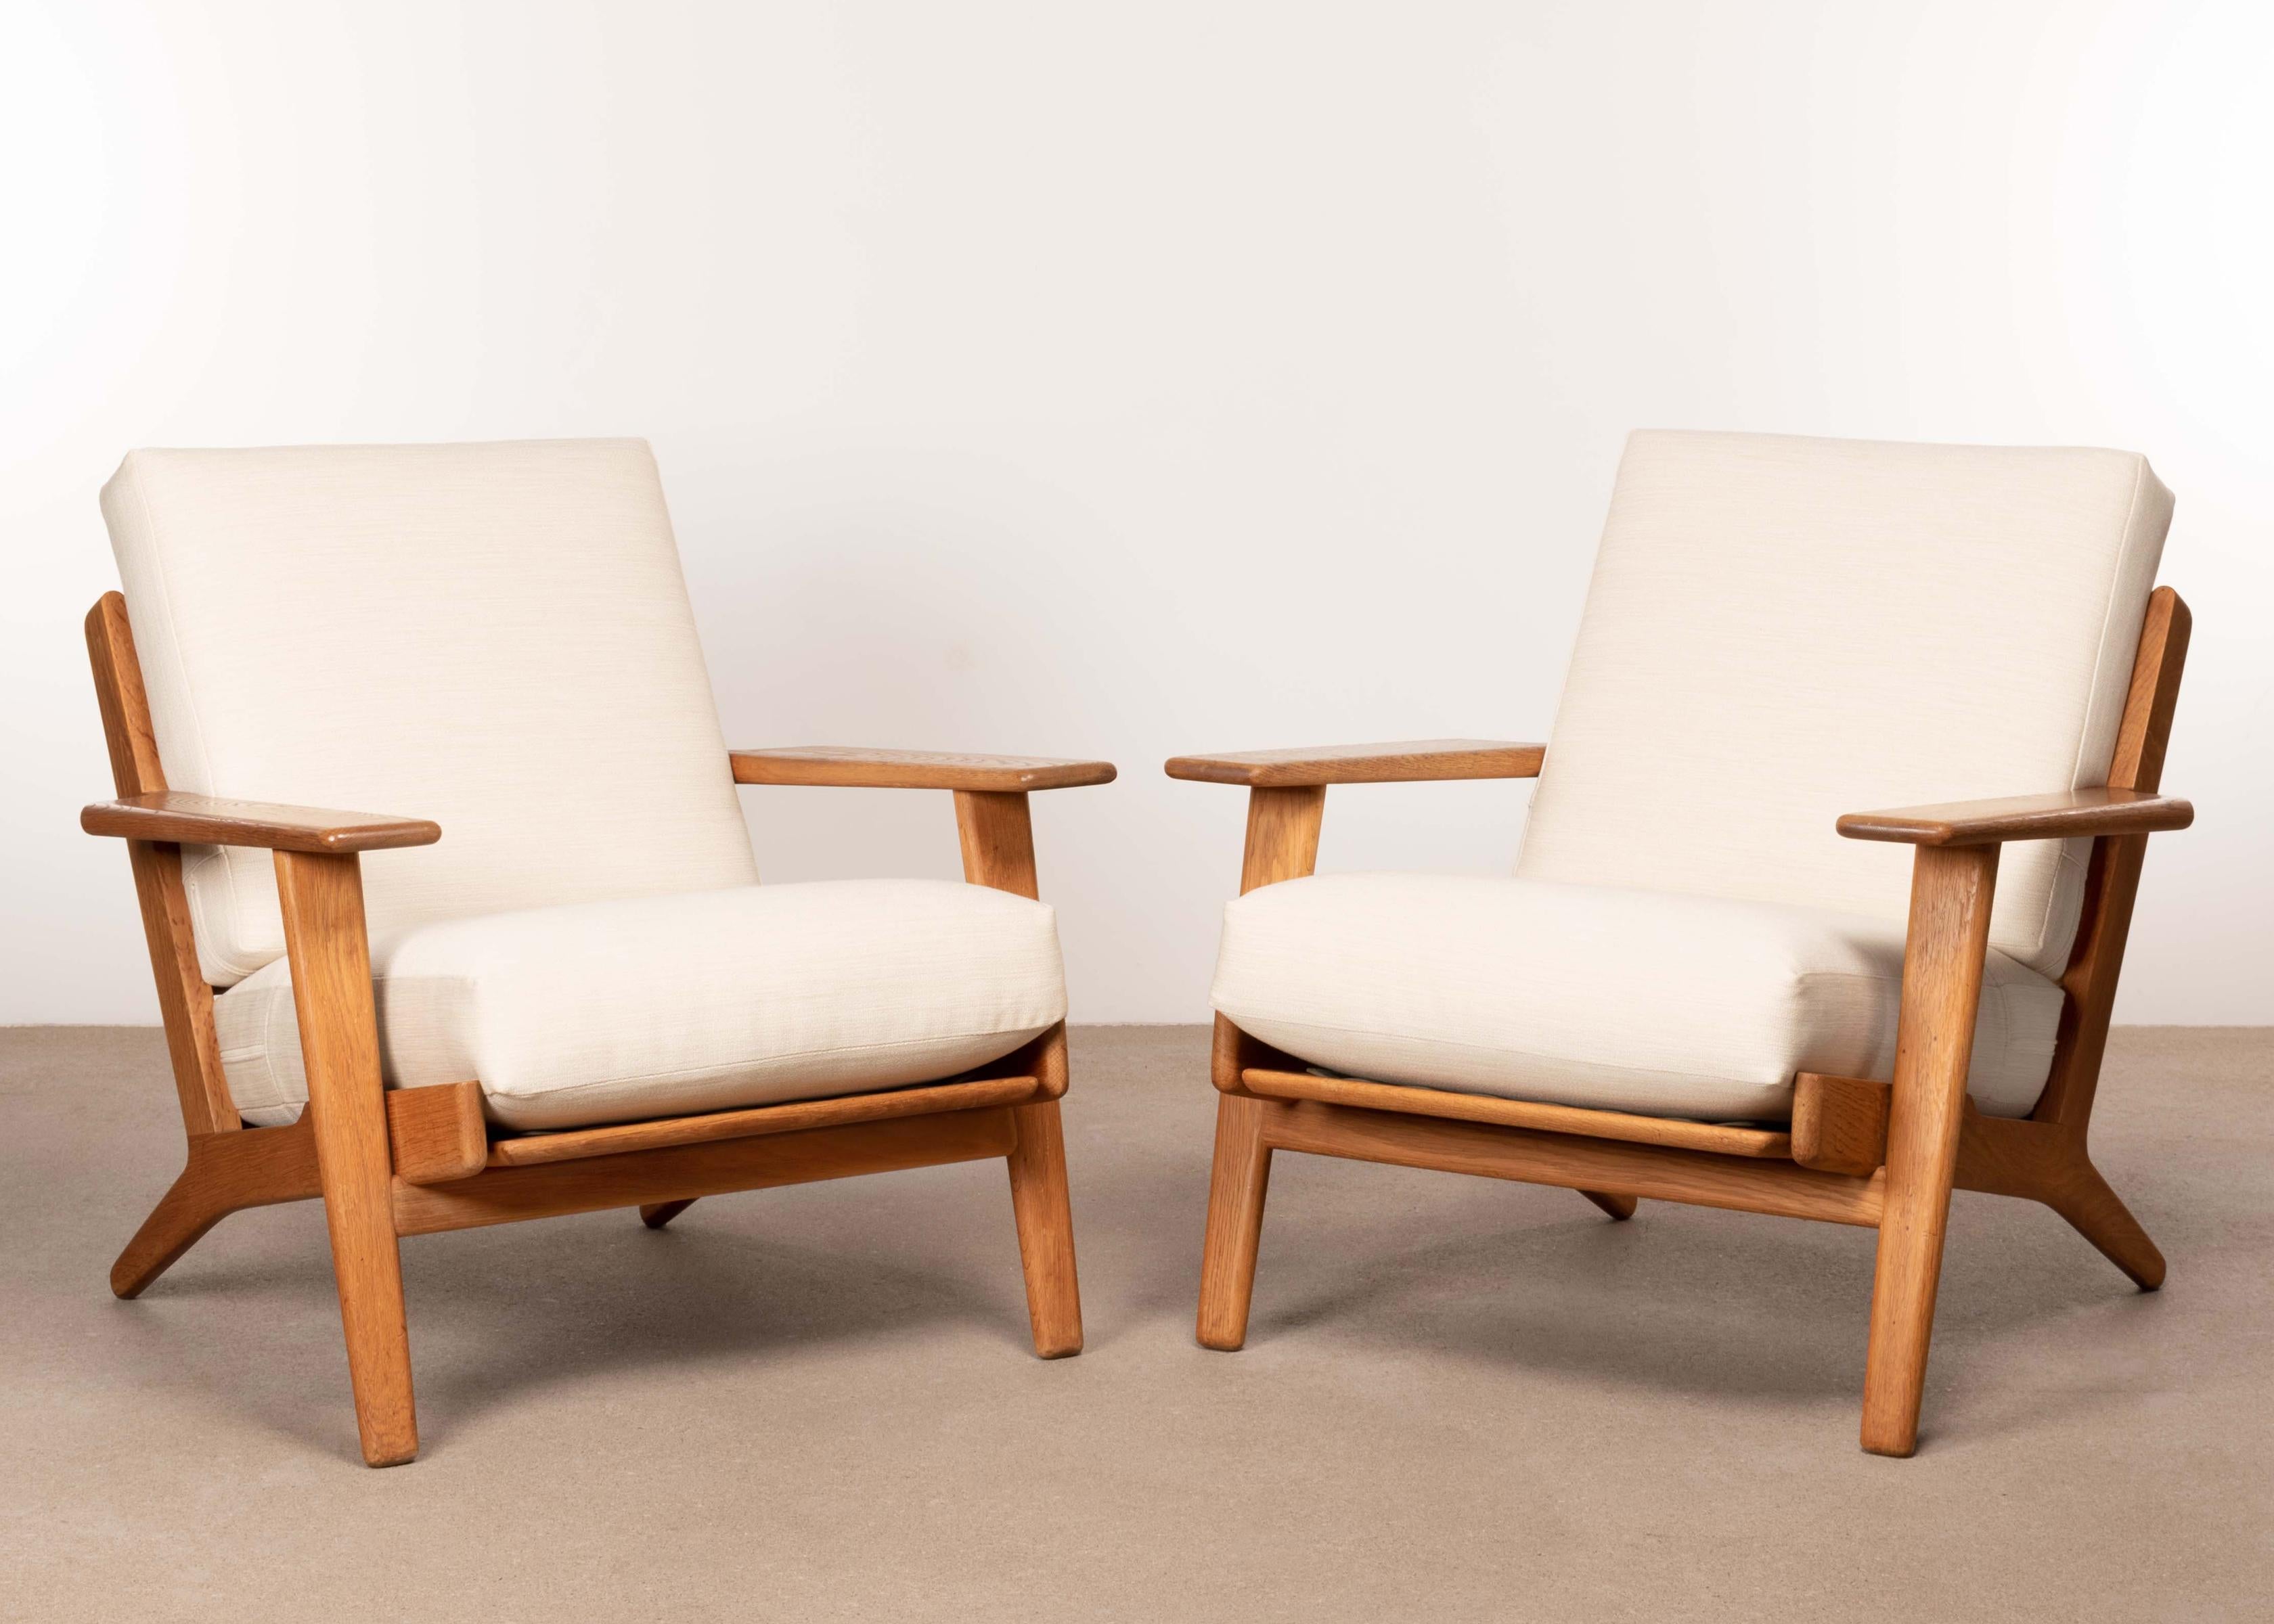 Great pair of Hans Hans Wegner GE290 easy / lounge chairs for GETAMA. Solid oak frames with strong wood grain. Original spring cushions reupholstered with Kvadrat Raf Simons Balder wool (0212) with a nice soft texture to that increases comfort and